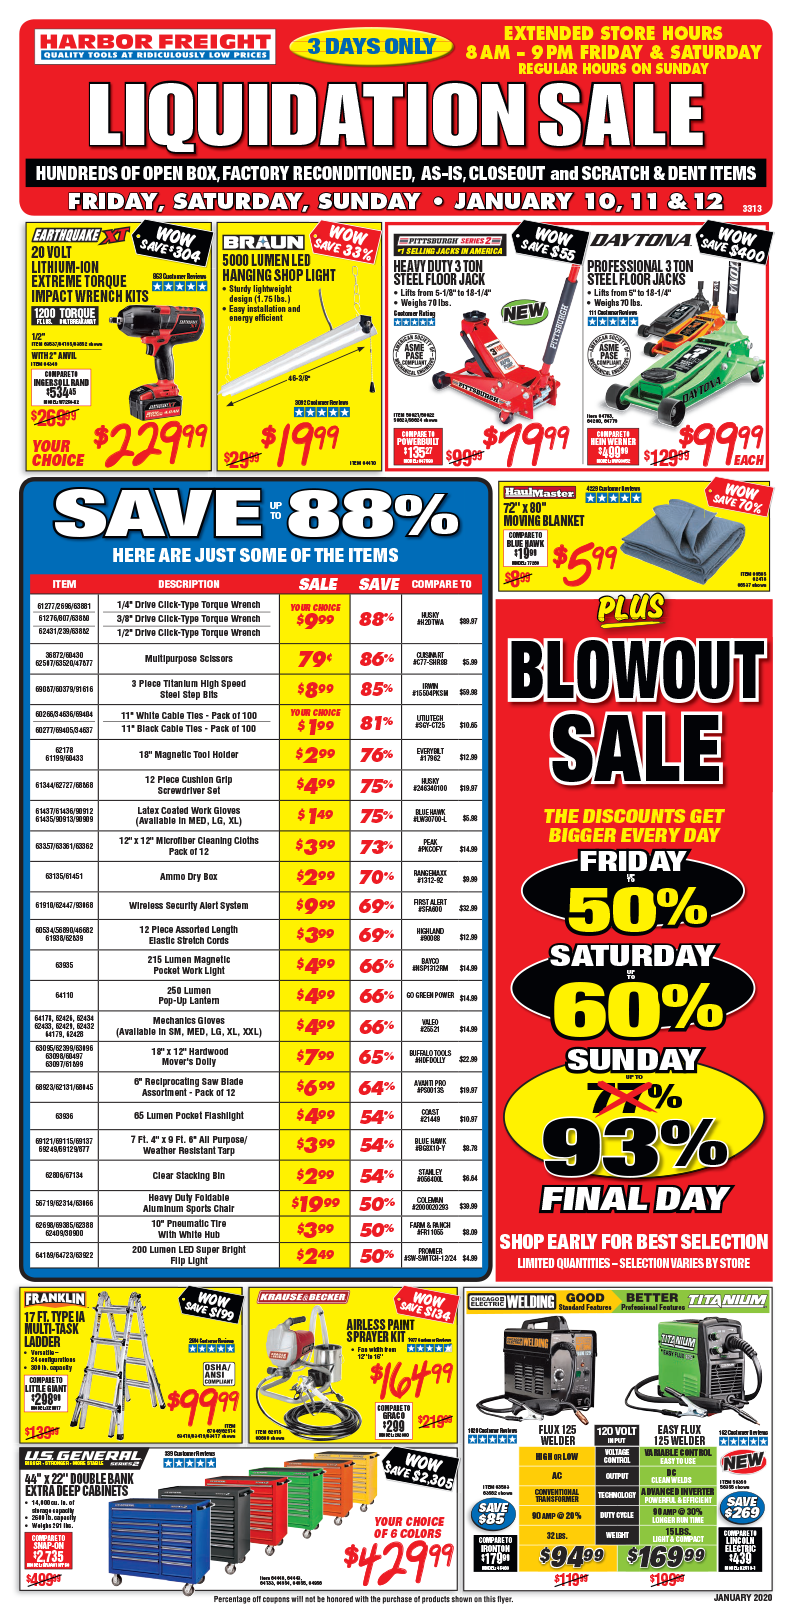 January Parking Lot Sale! Harbor Freight Coupons